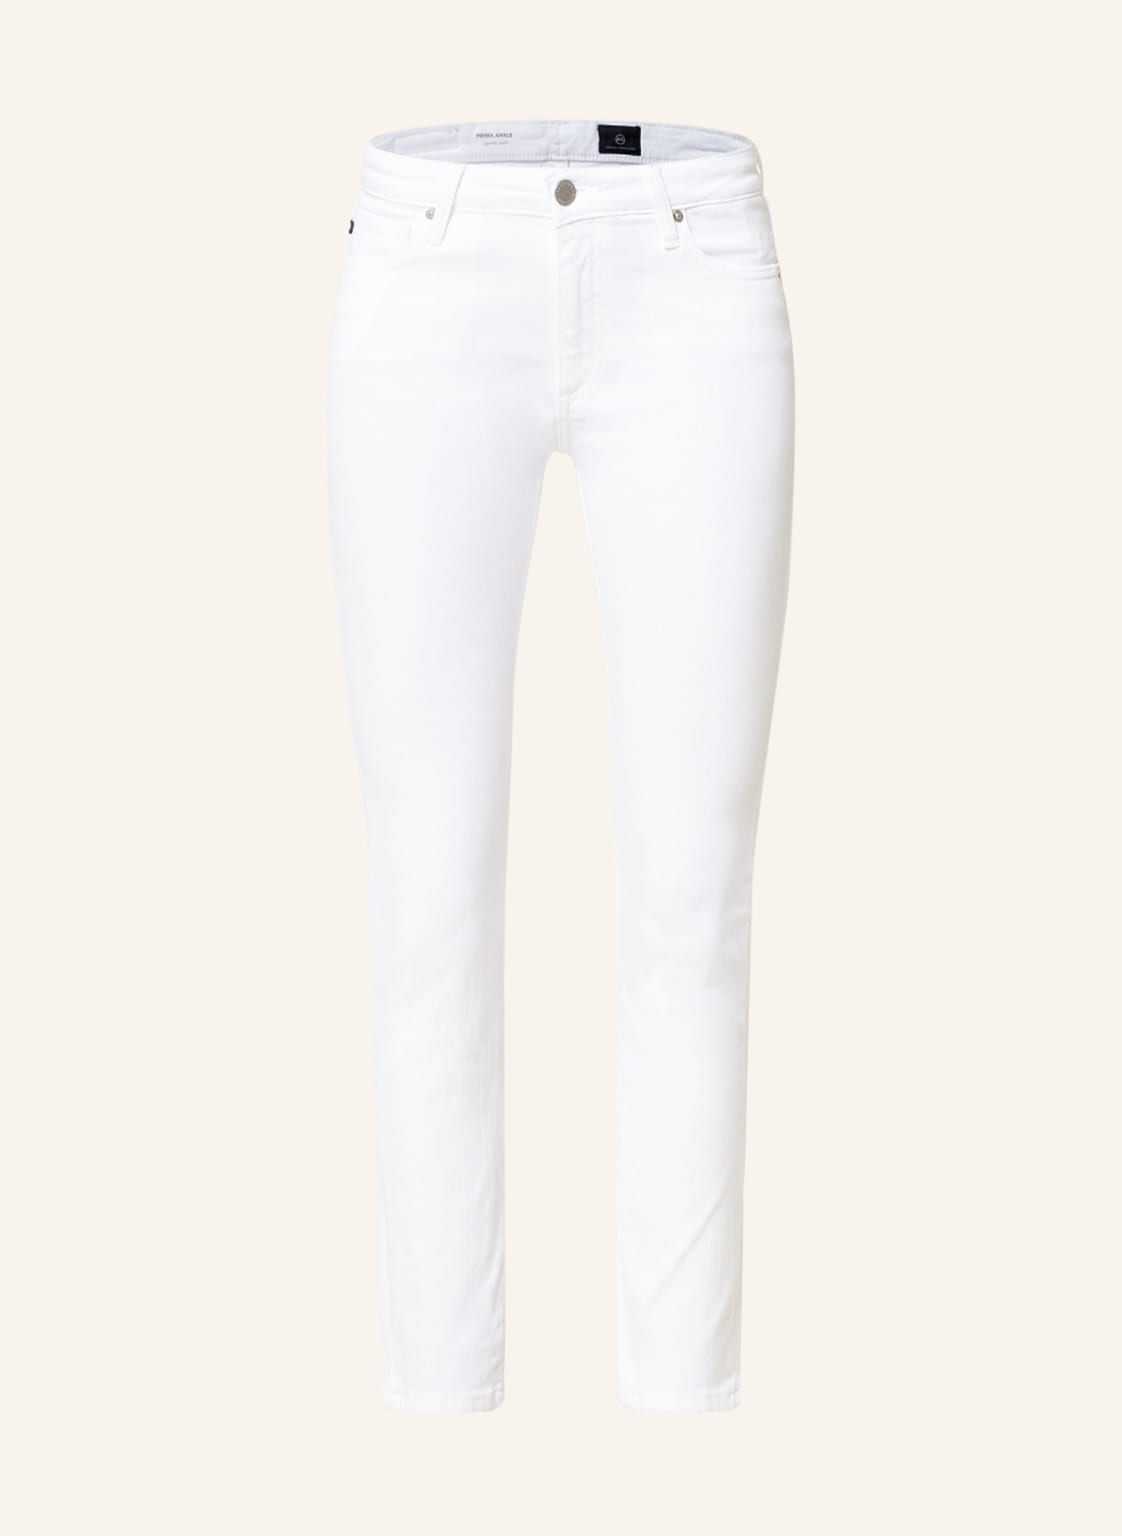 Ag Jeans Jeans Prima Ankle weiss von ag jeans